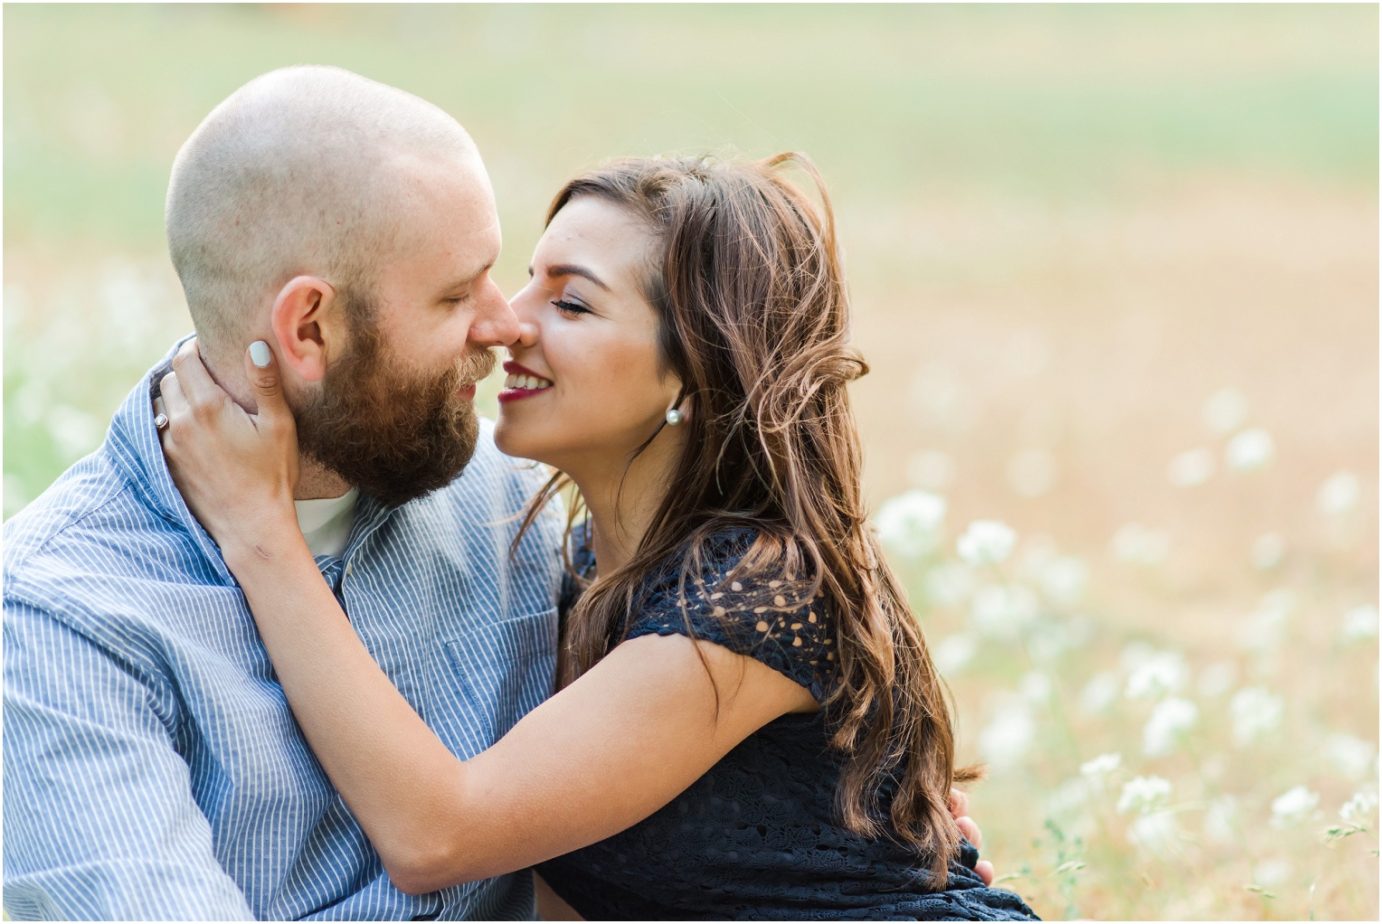 Boulder Cave Engagement Session Naches WA Couple snuggling in the grass